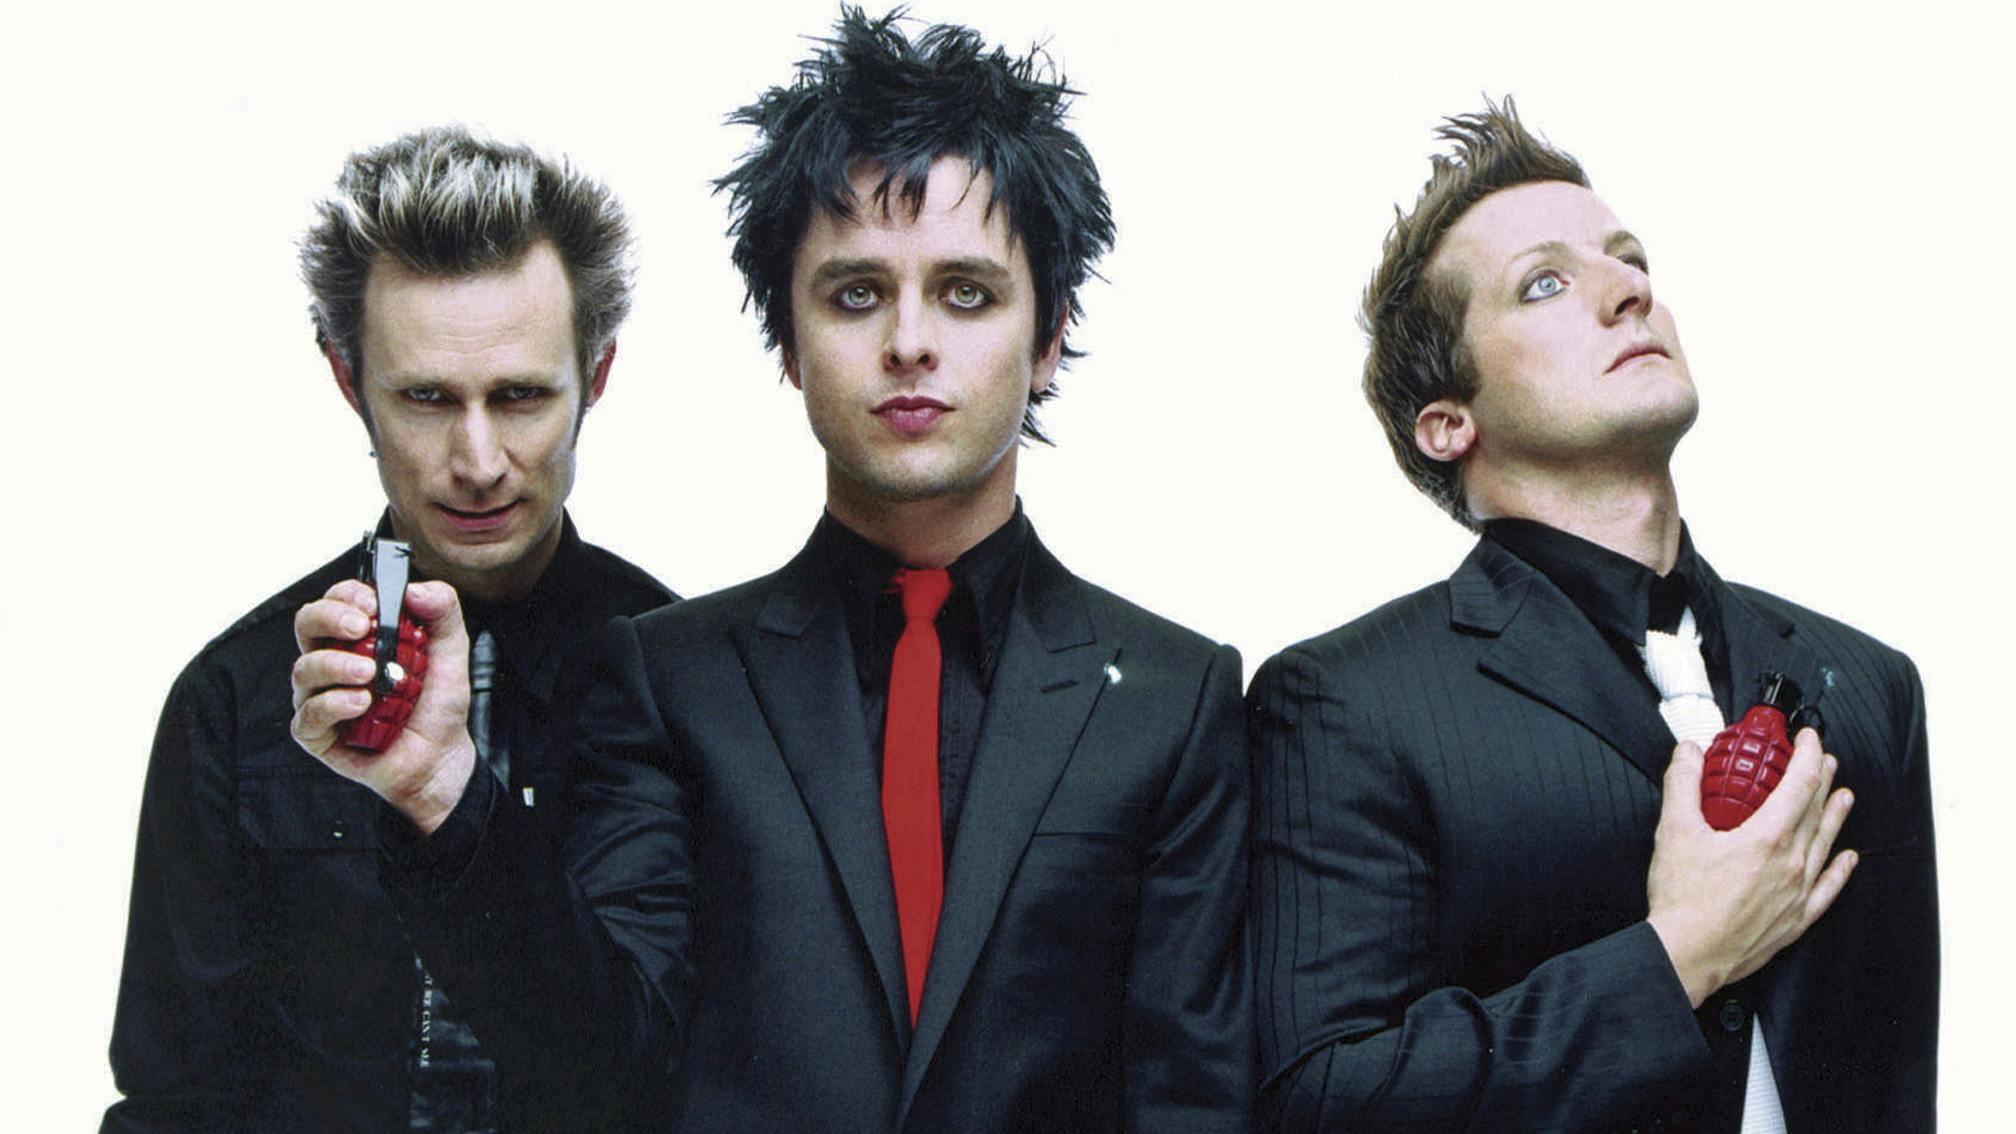 Green Day were asked about their pre-American Idiot ‘stolen’ album, Cigarettes And Valentines